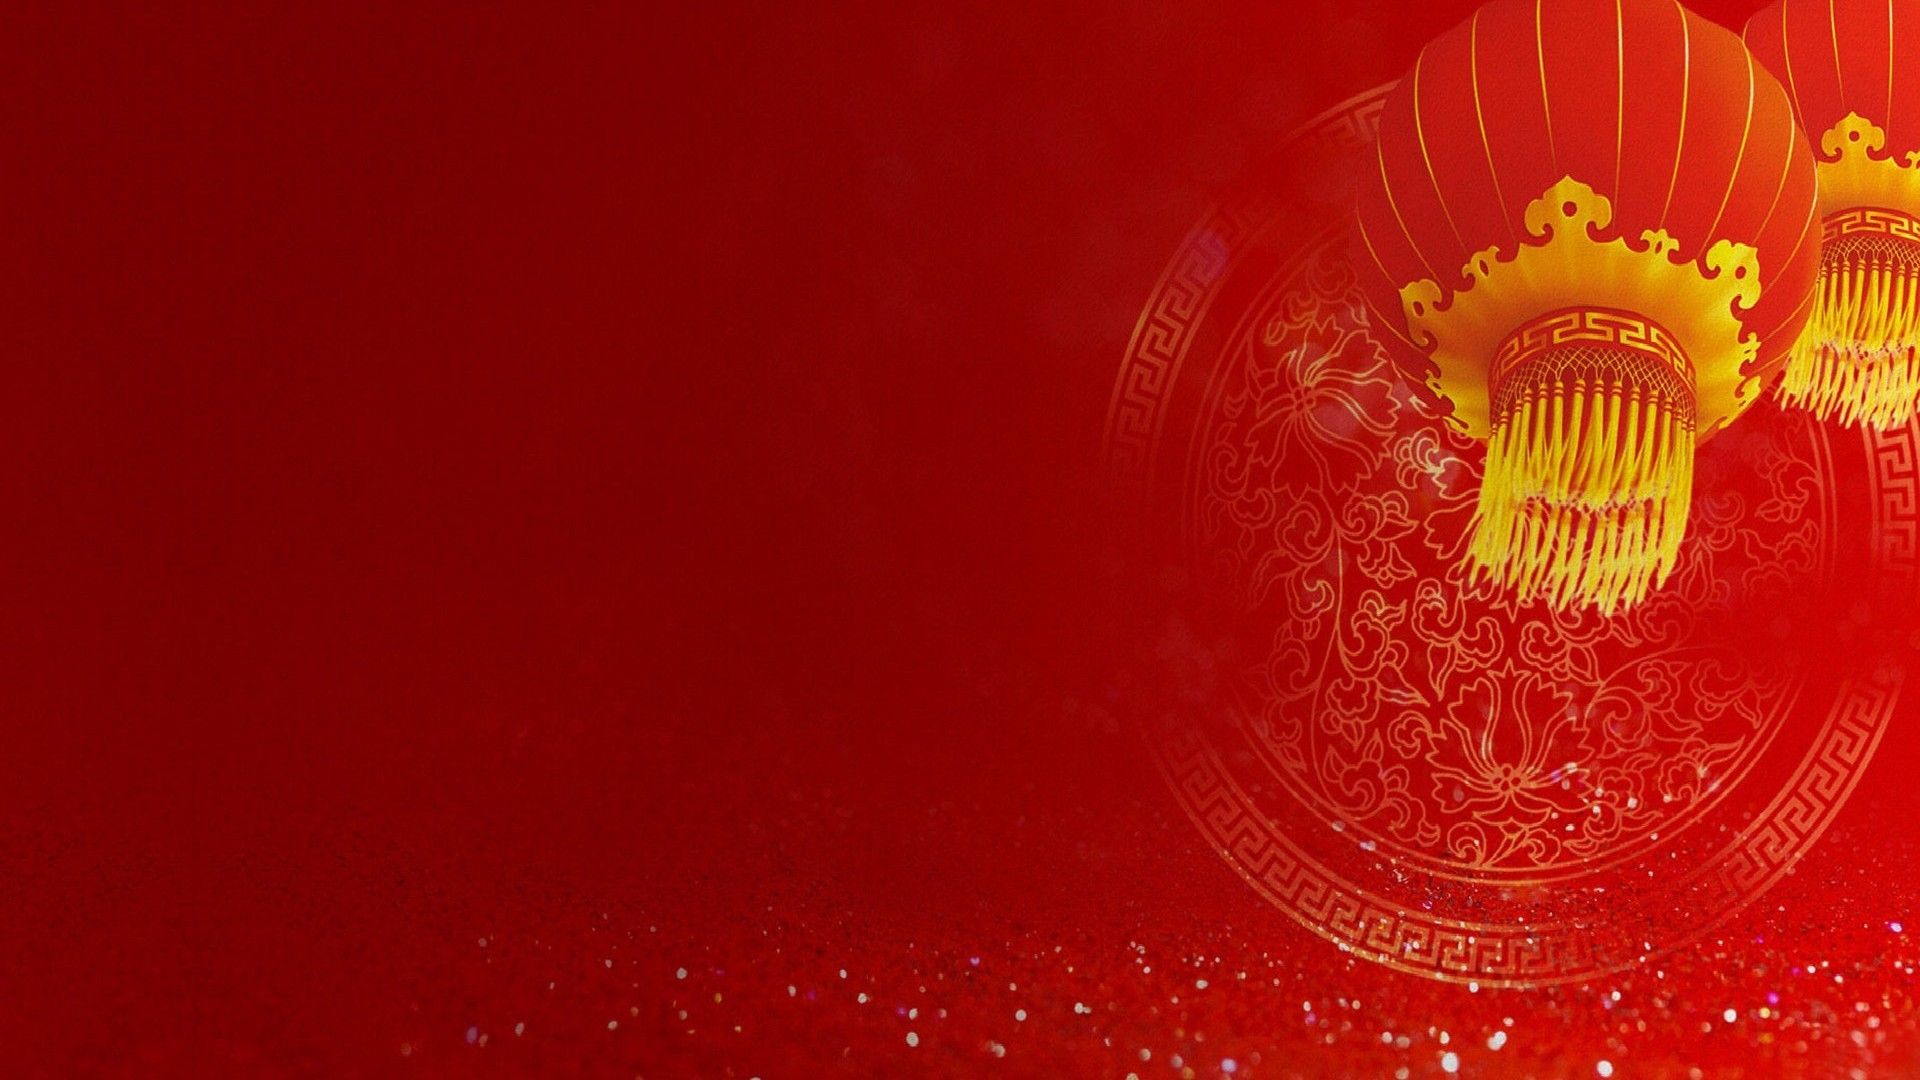 Chinese New Year Desktop Wallpaper & Background Beautiful Best Available For Download Chinese New Year Desktop Photo Free On Zicxa.com Image